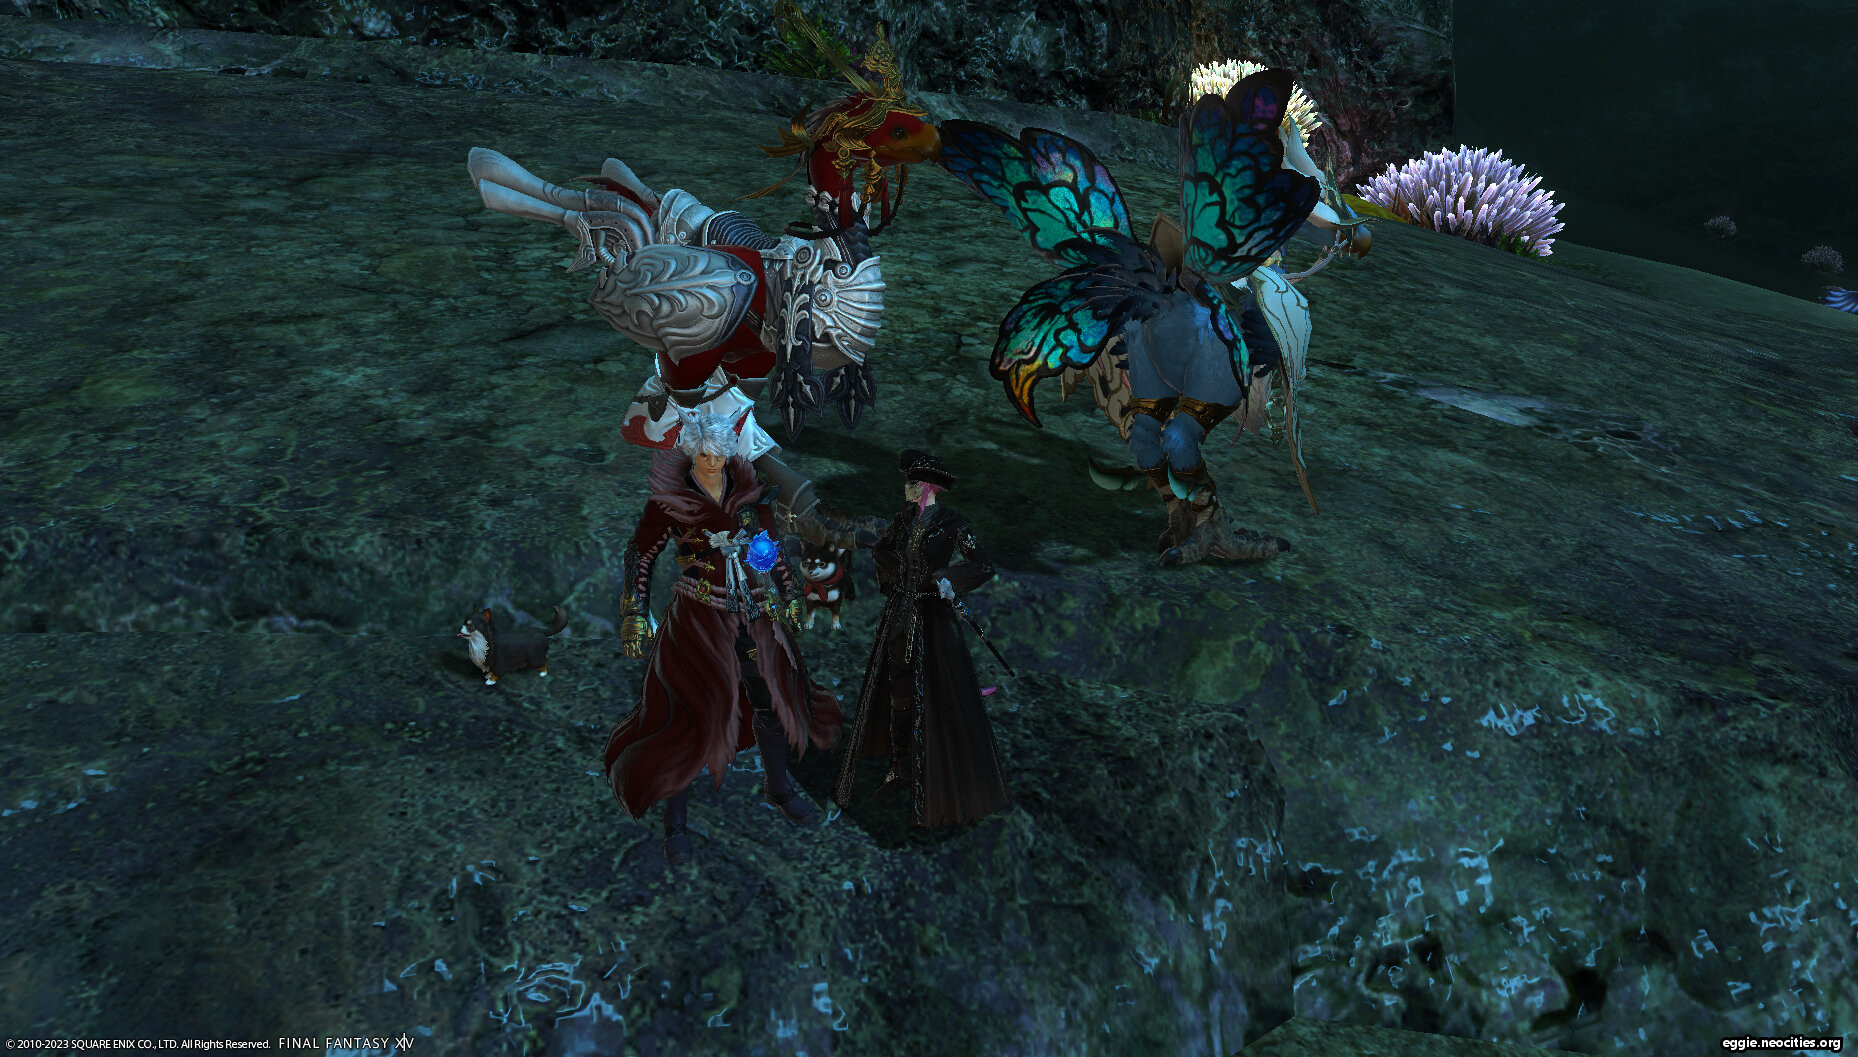 Zel, Xarale, and their chocobos standing in the tempest.